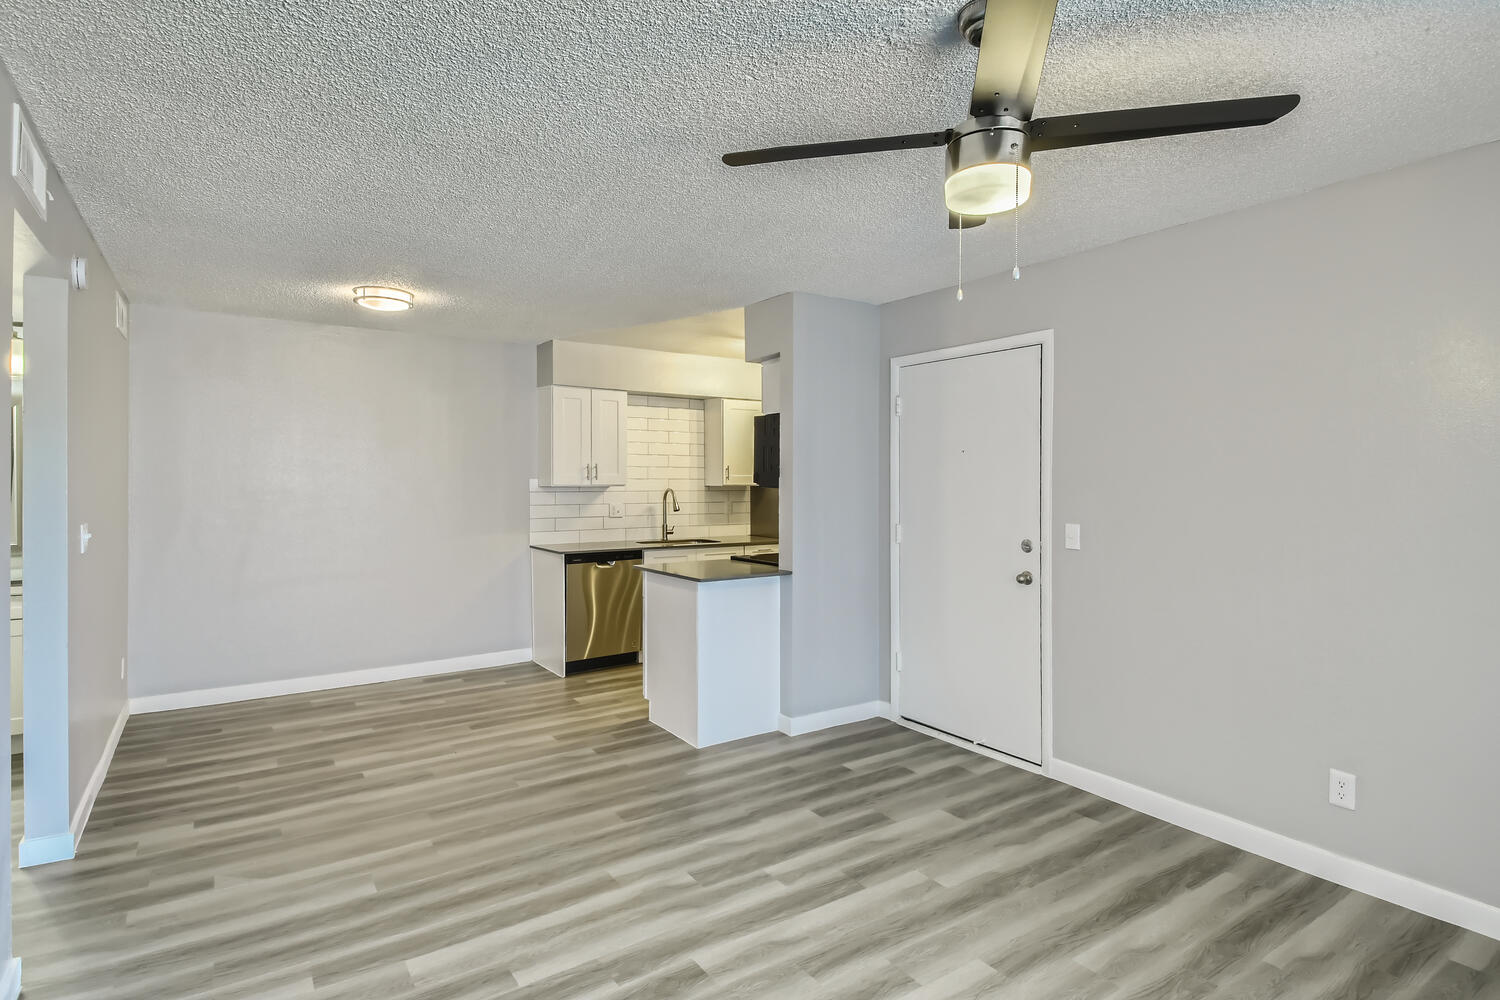 An open-concept apartment with wood-style floors and a dining and kitchen area at Rise North Ridge.